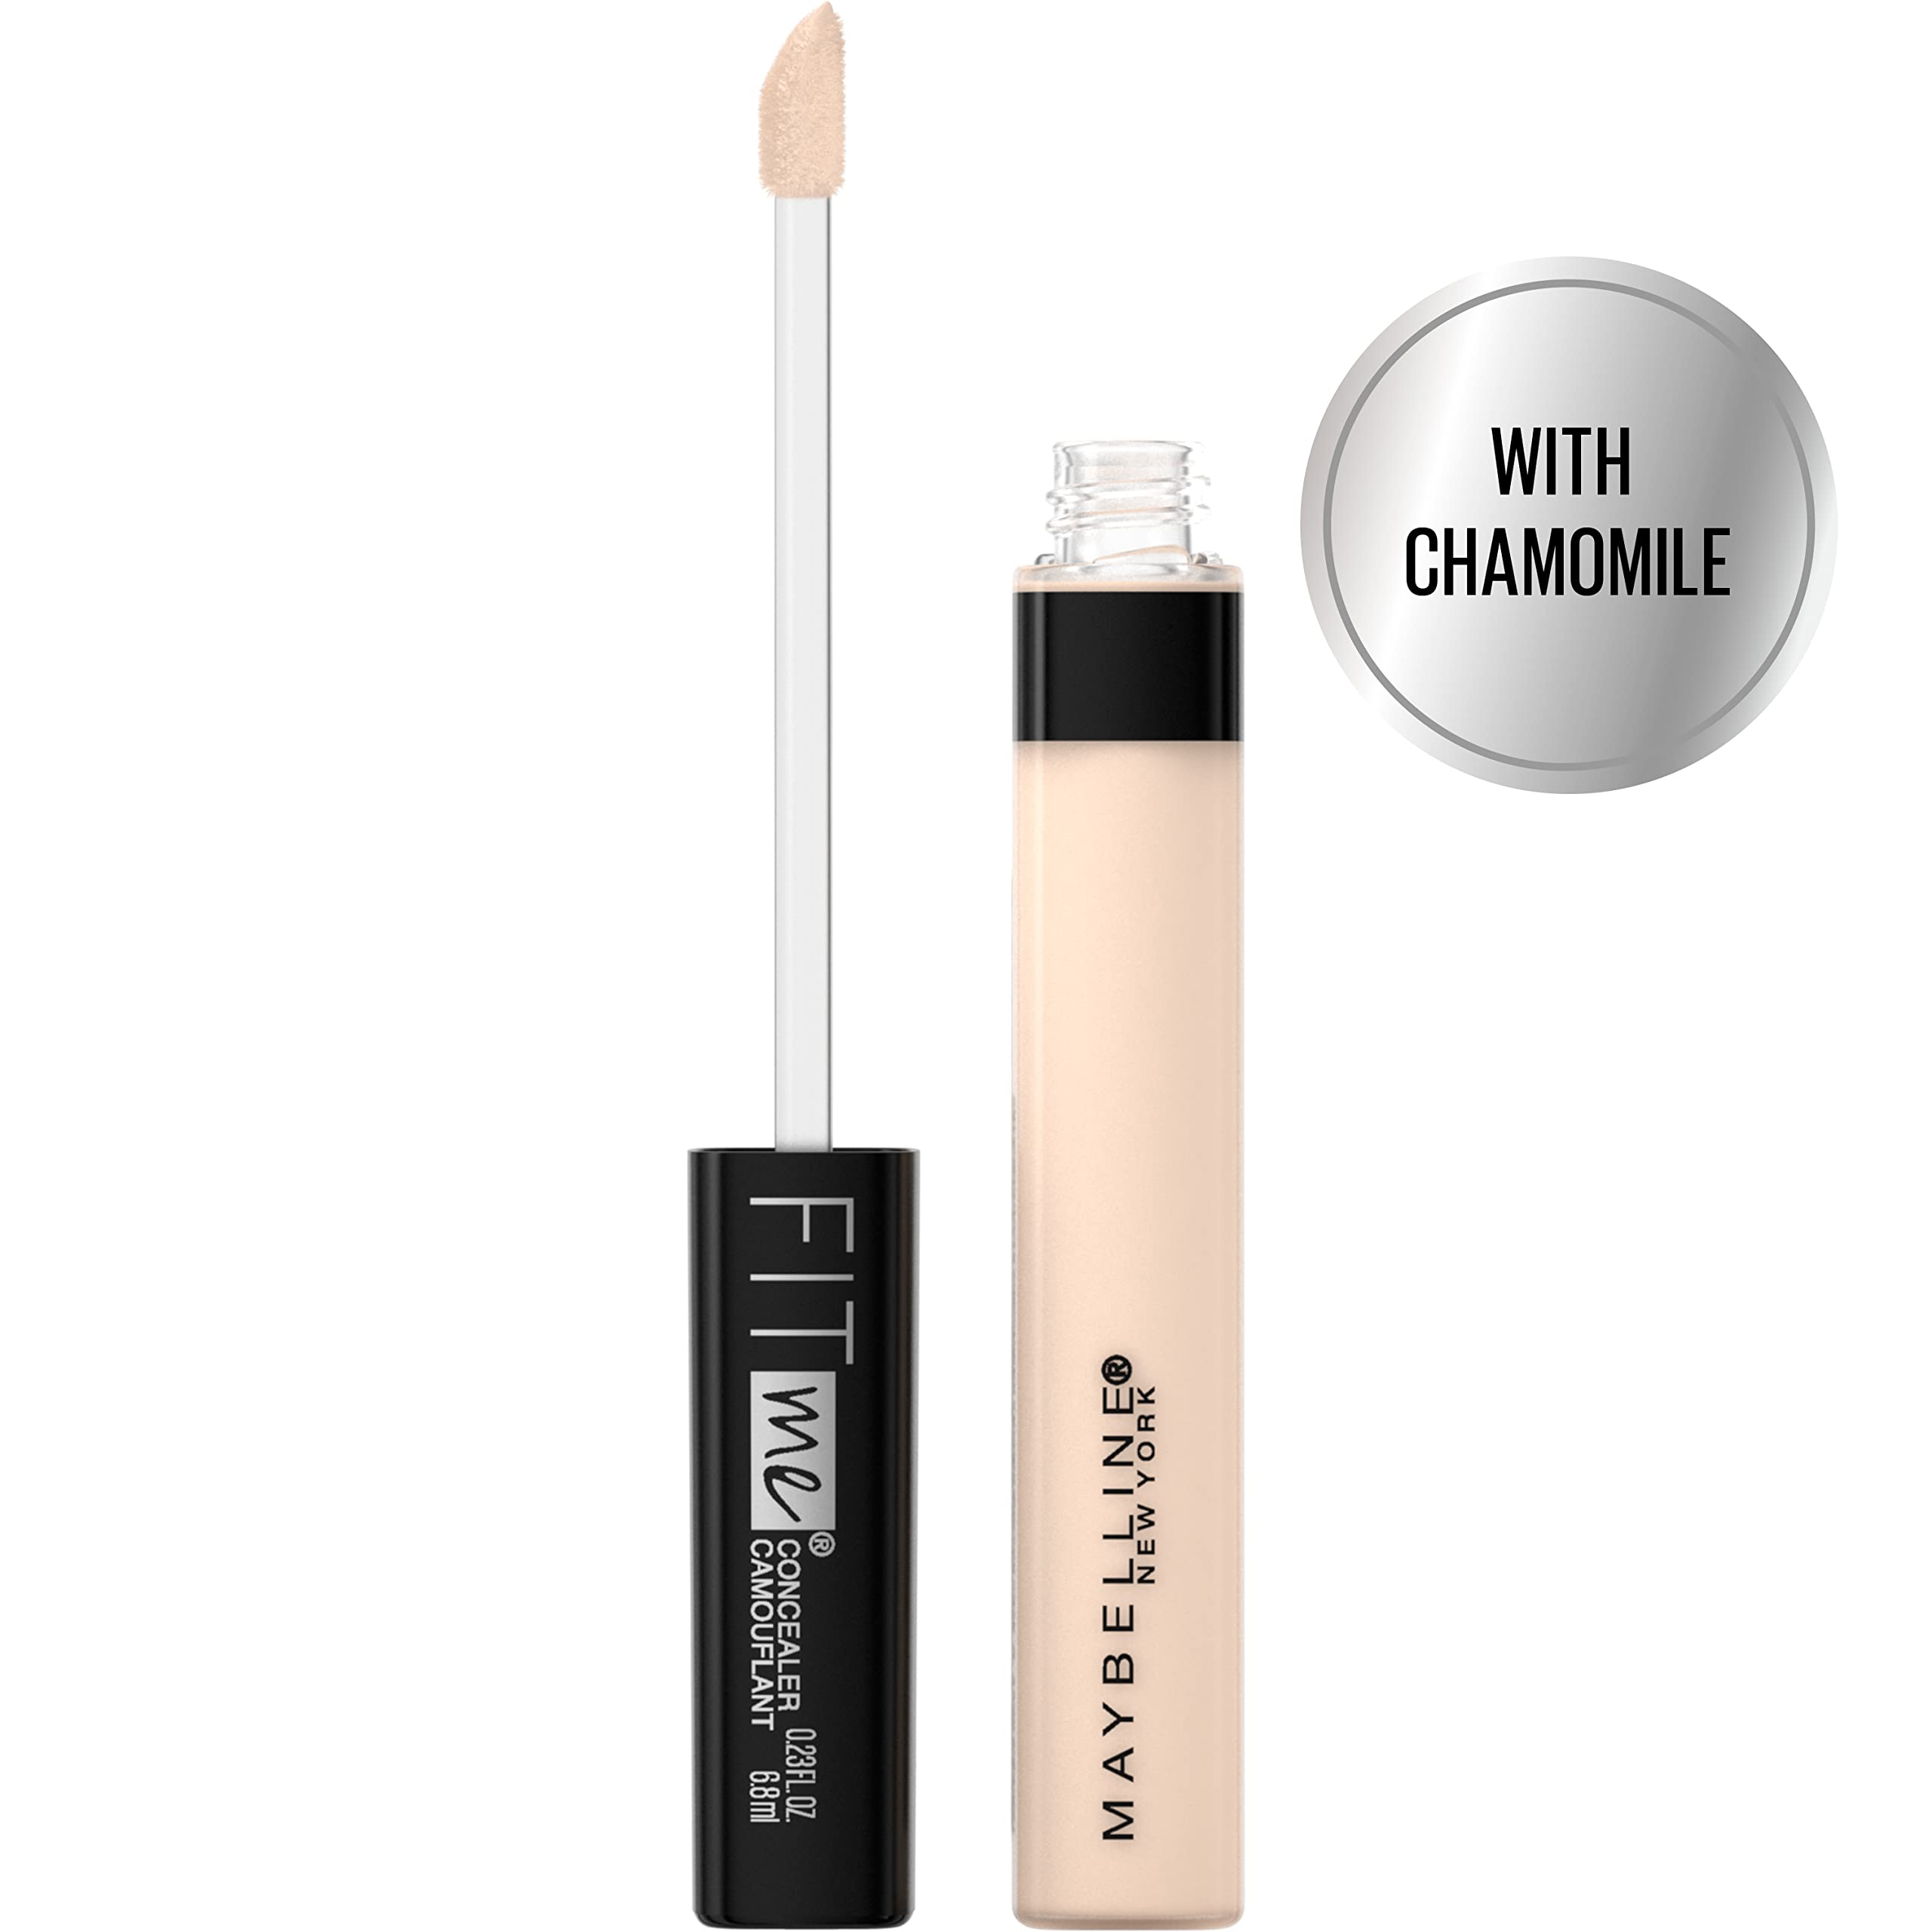 Maybelline New York Fit Me Liquid Concealer Makeup, Natural Coverage, Lightweight, Conceals, Covers Oil-Free, Light, 1 Count